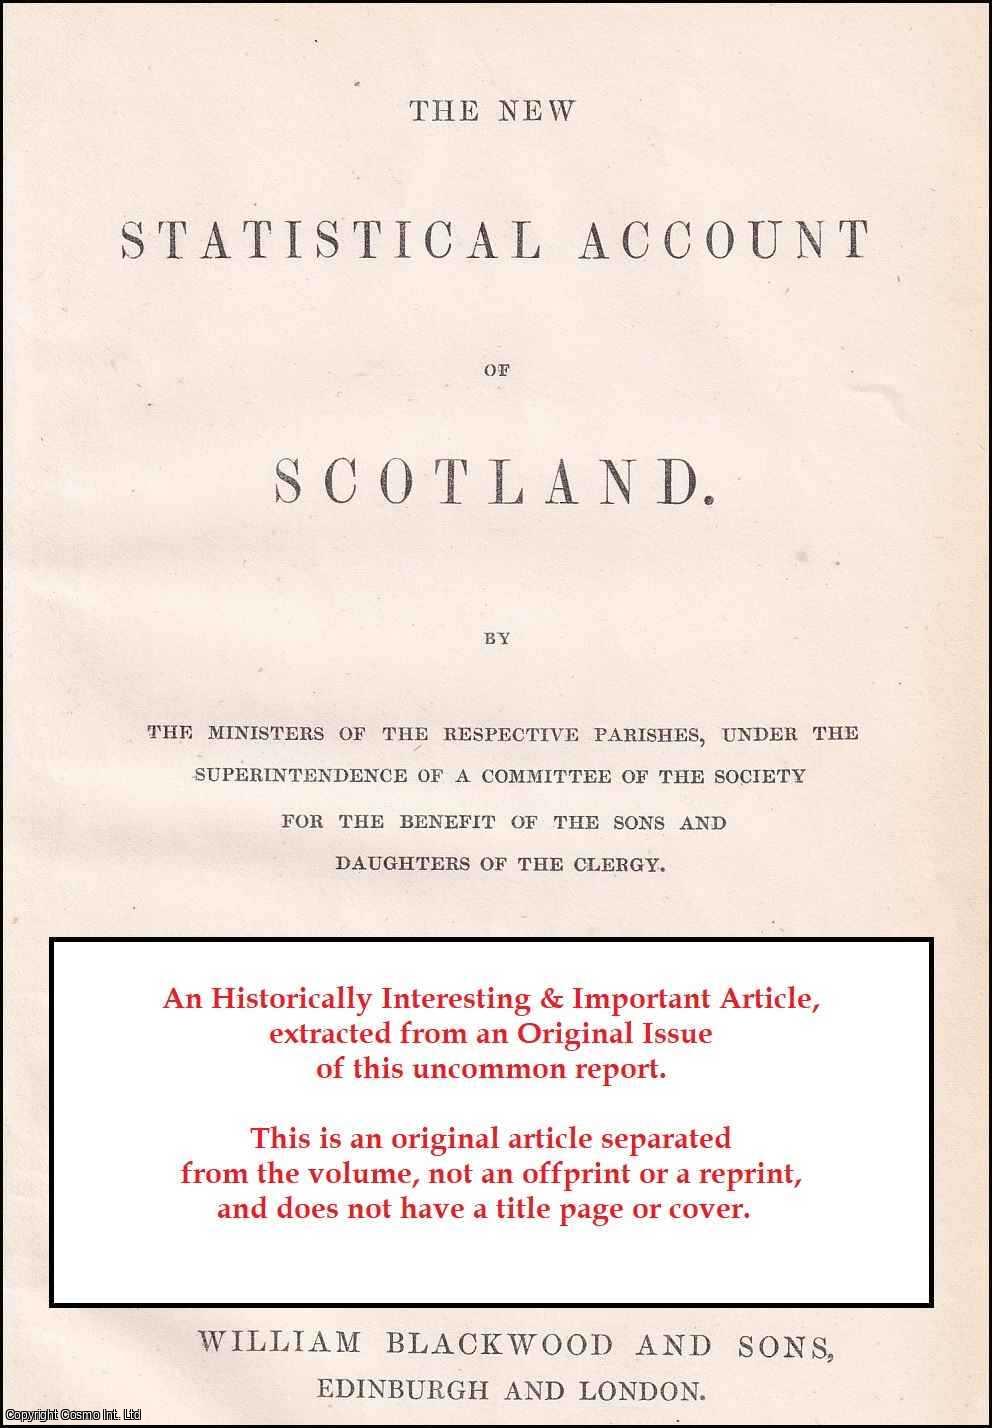 Rev. William Burns - Parish of Kilsyth. Presbytery of Glasgow, Synod of Glasgow and Ayr. An uncommon original article from The New Statistical Account of Scotland, 1845.